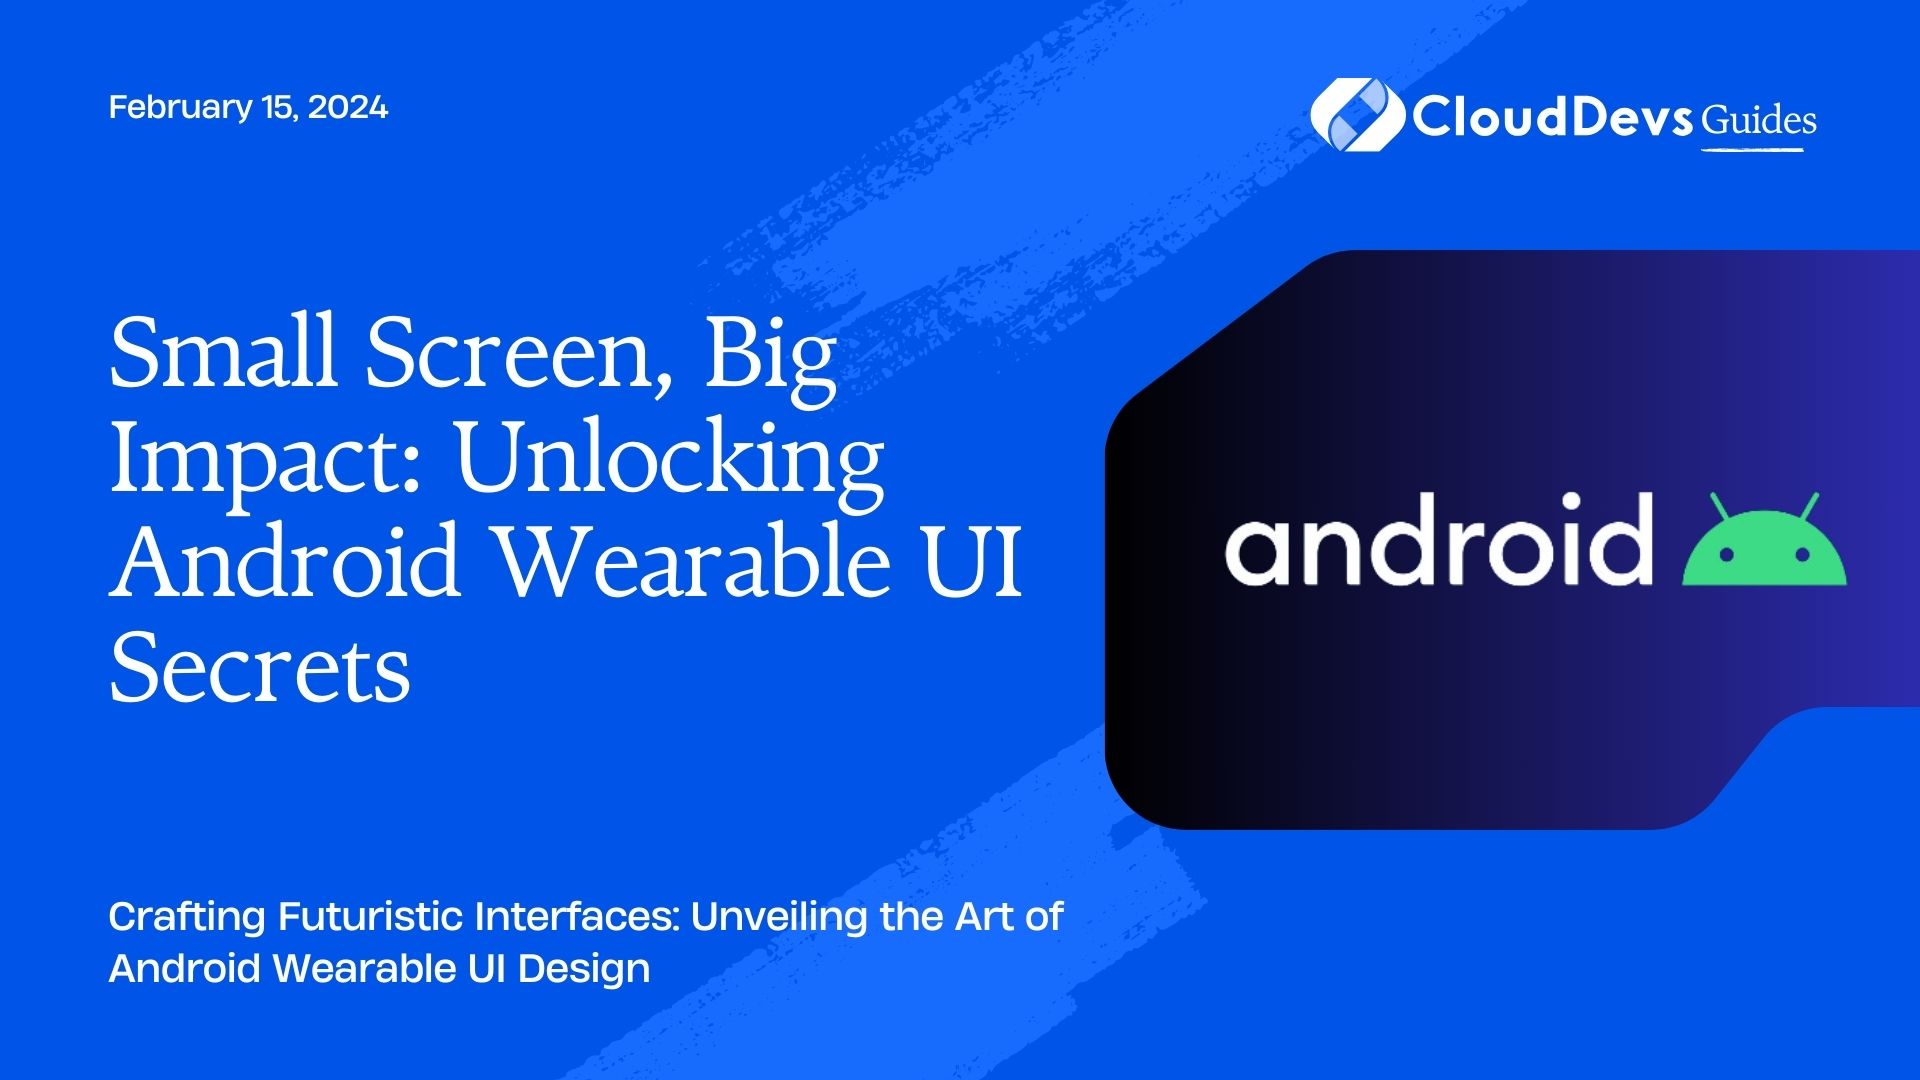 Android Wearable UI: Designing for Small Screens